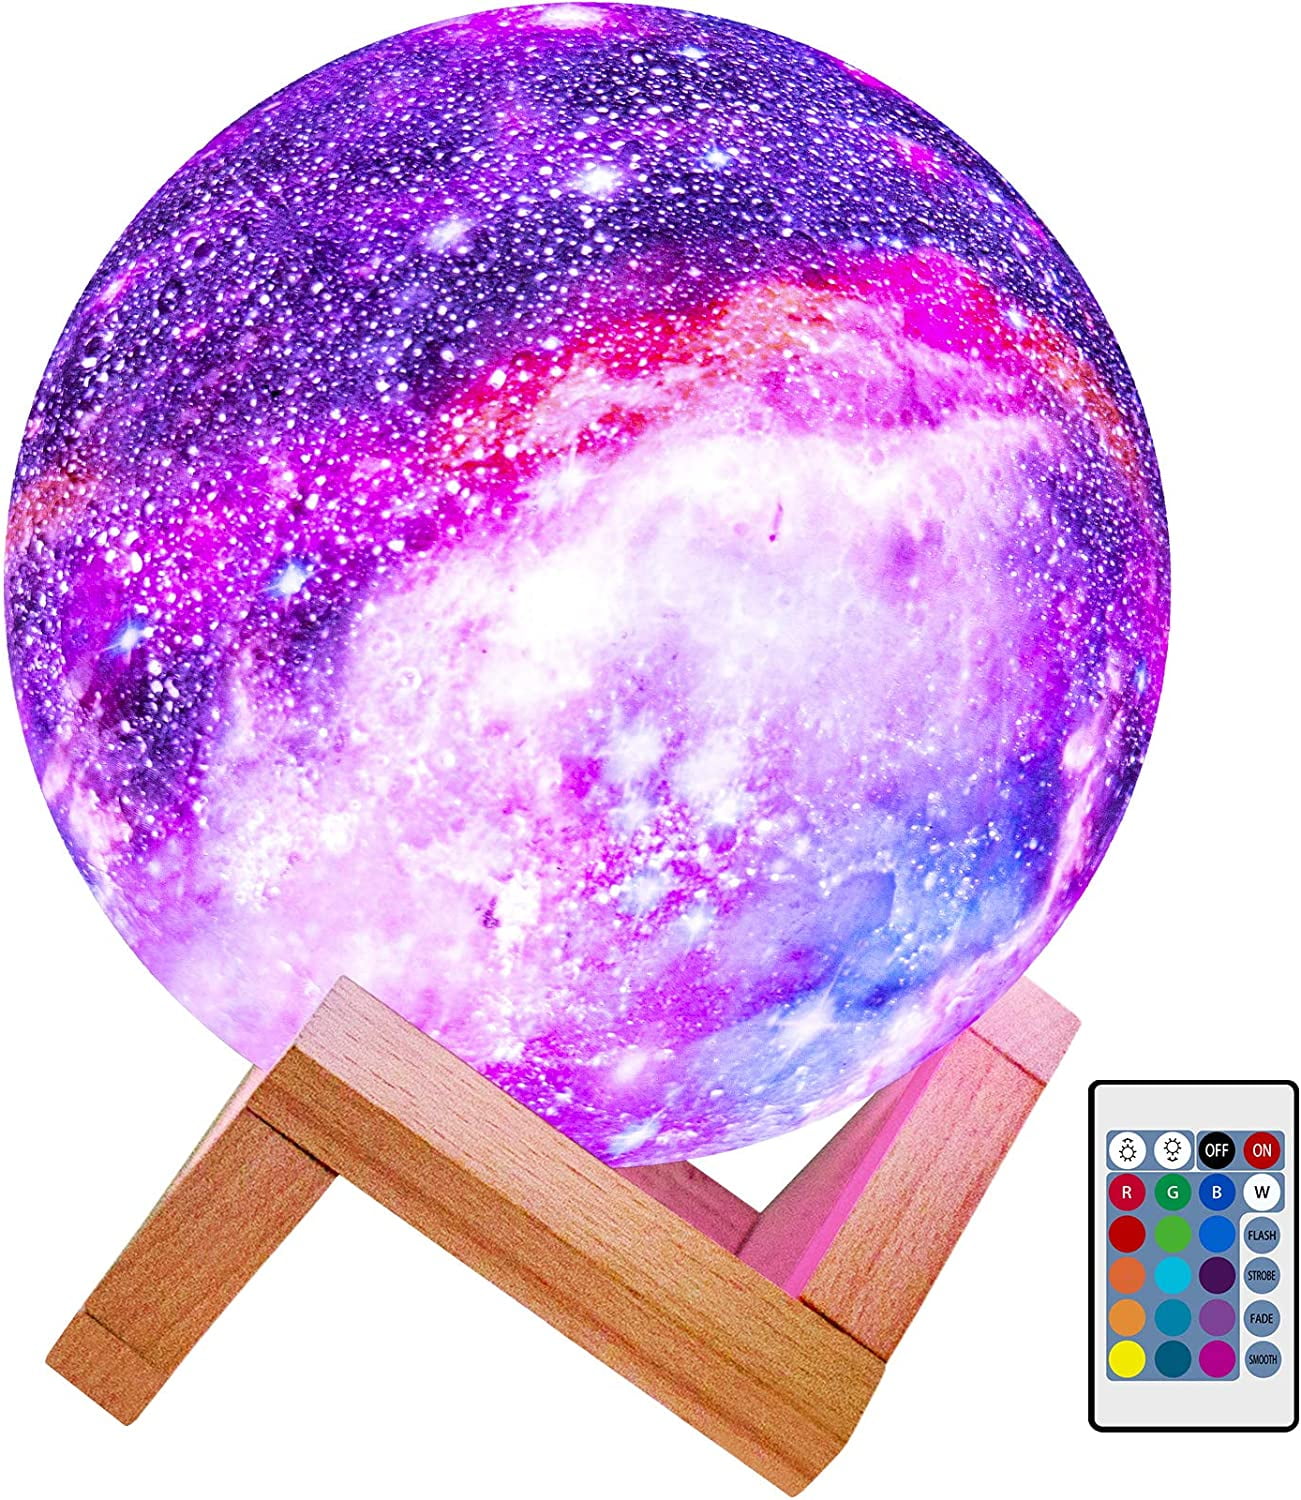 16 Colors 3D Moon Light LED Galaxy USB Rechargeable Touch Lamp With Stand Night 